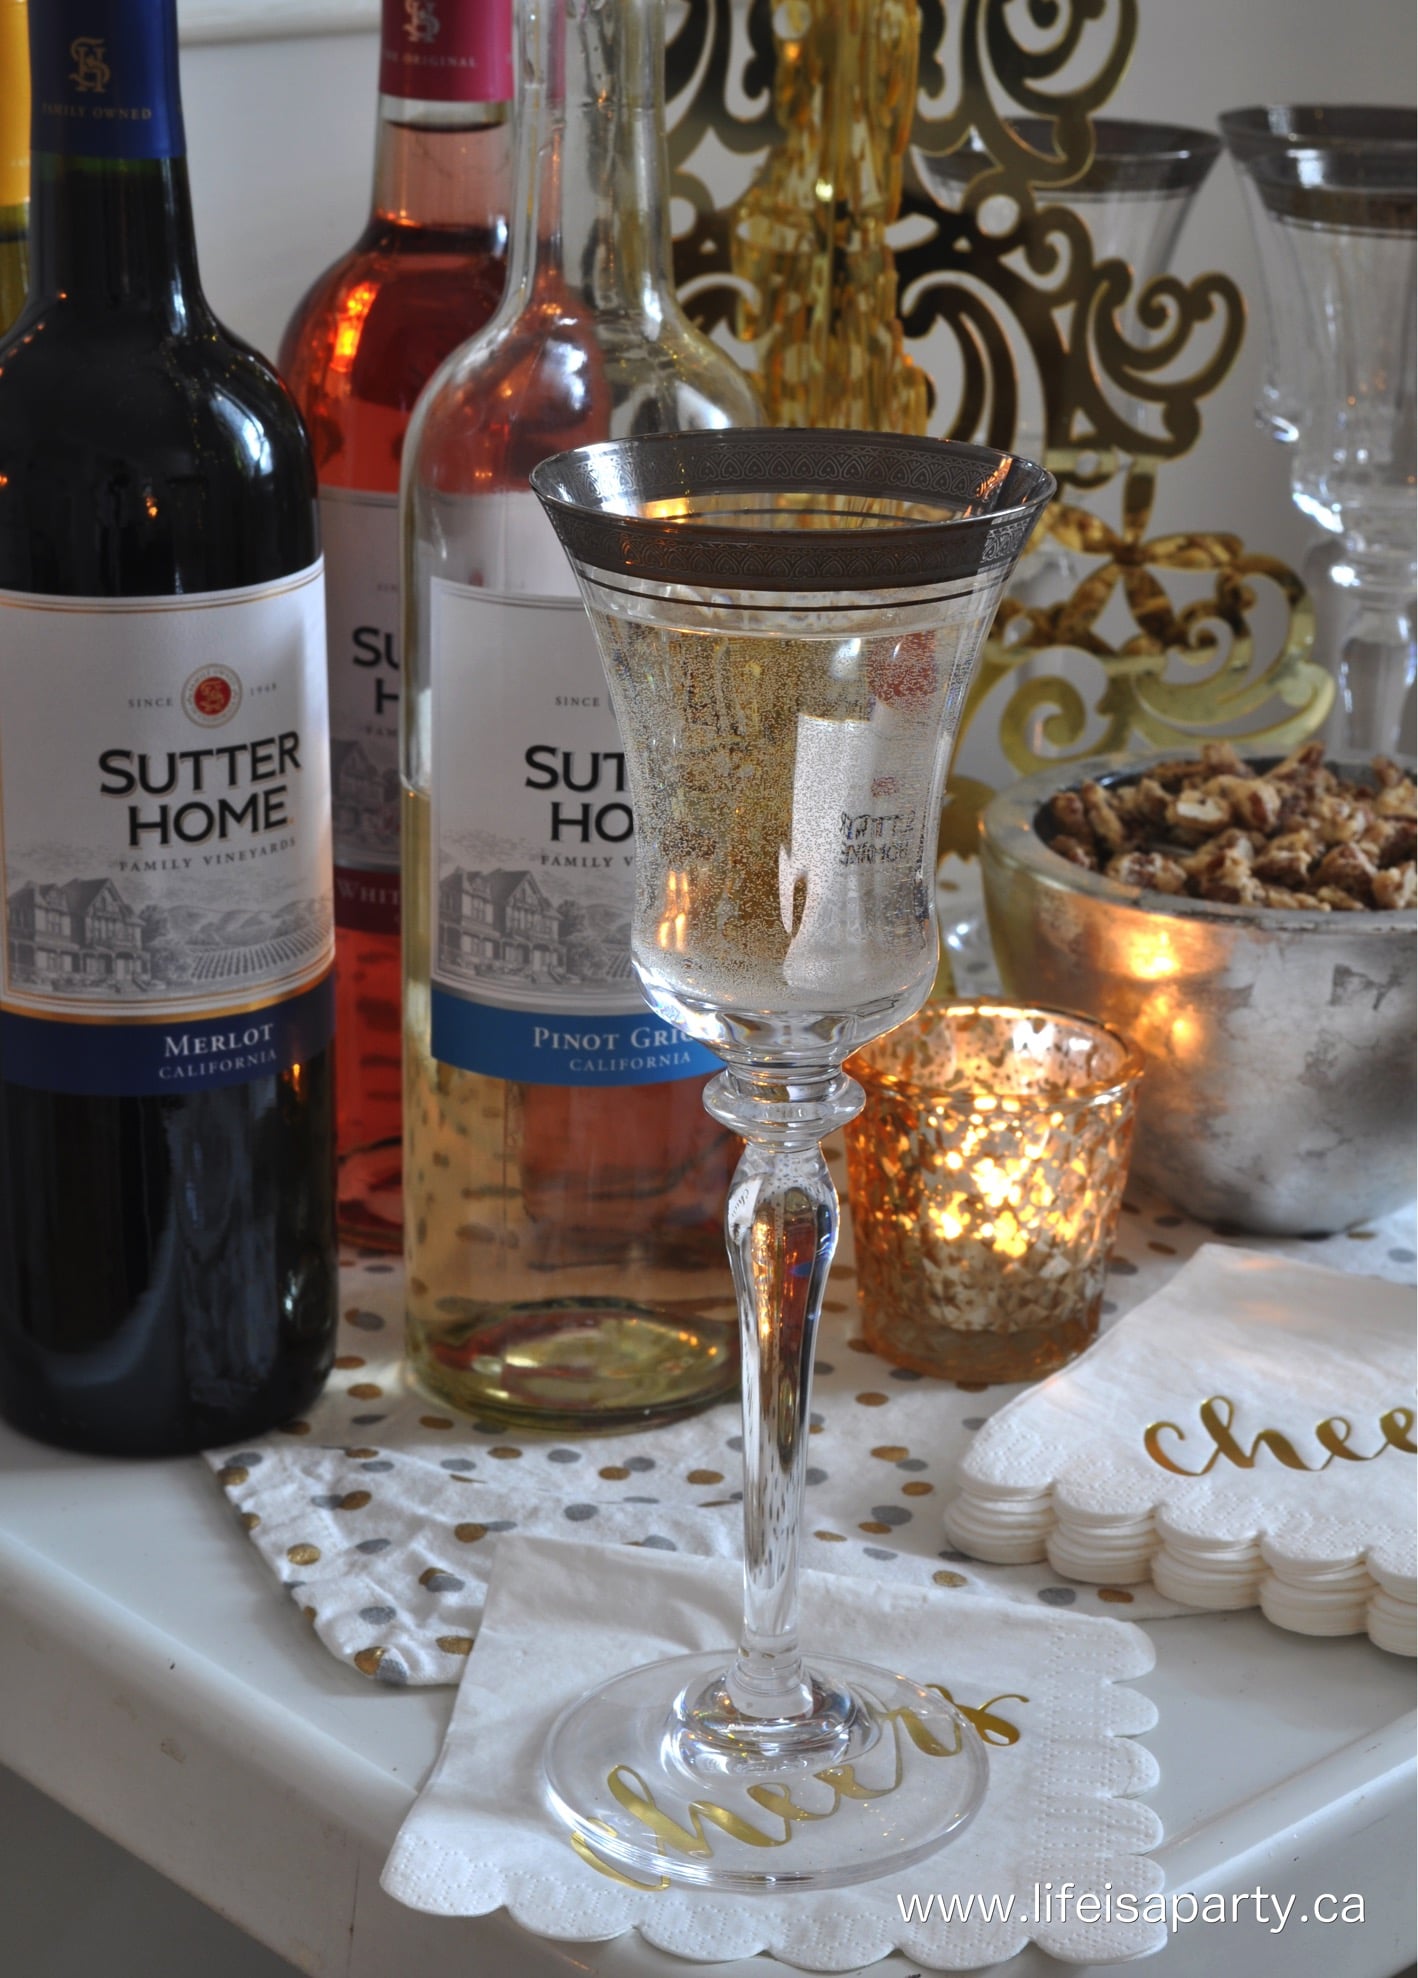 Wine glass with a silver rim, and wine bottles on a bar cart.